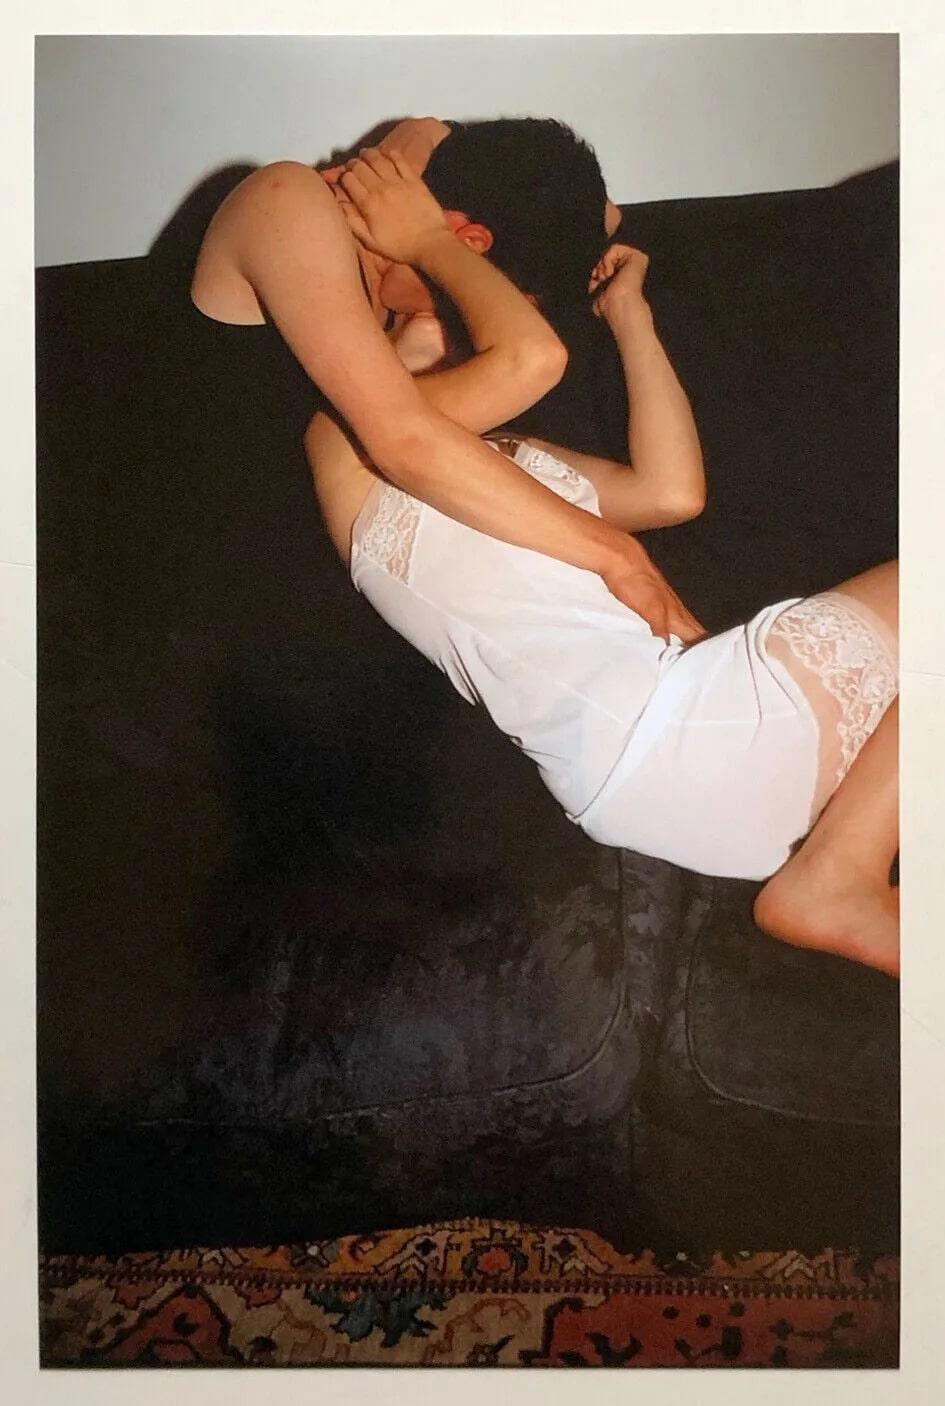 By Nan Goldin, 

Swan-Like Embrace, Paris
C-Print on paper
8 x 5 1/8 inches
Signed